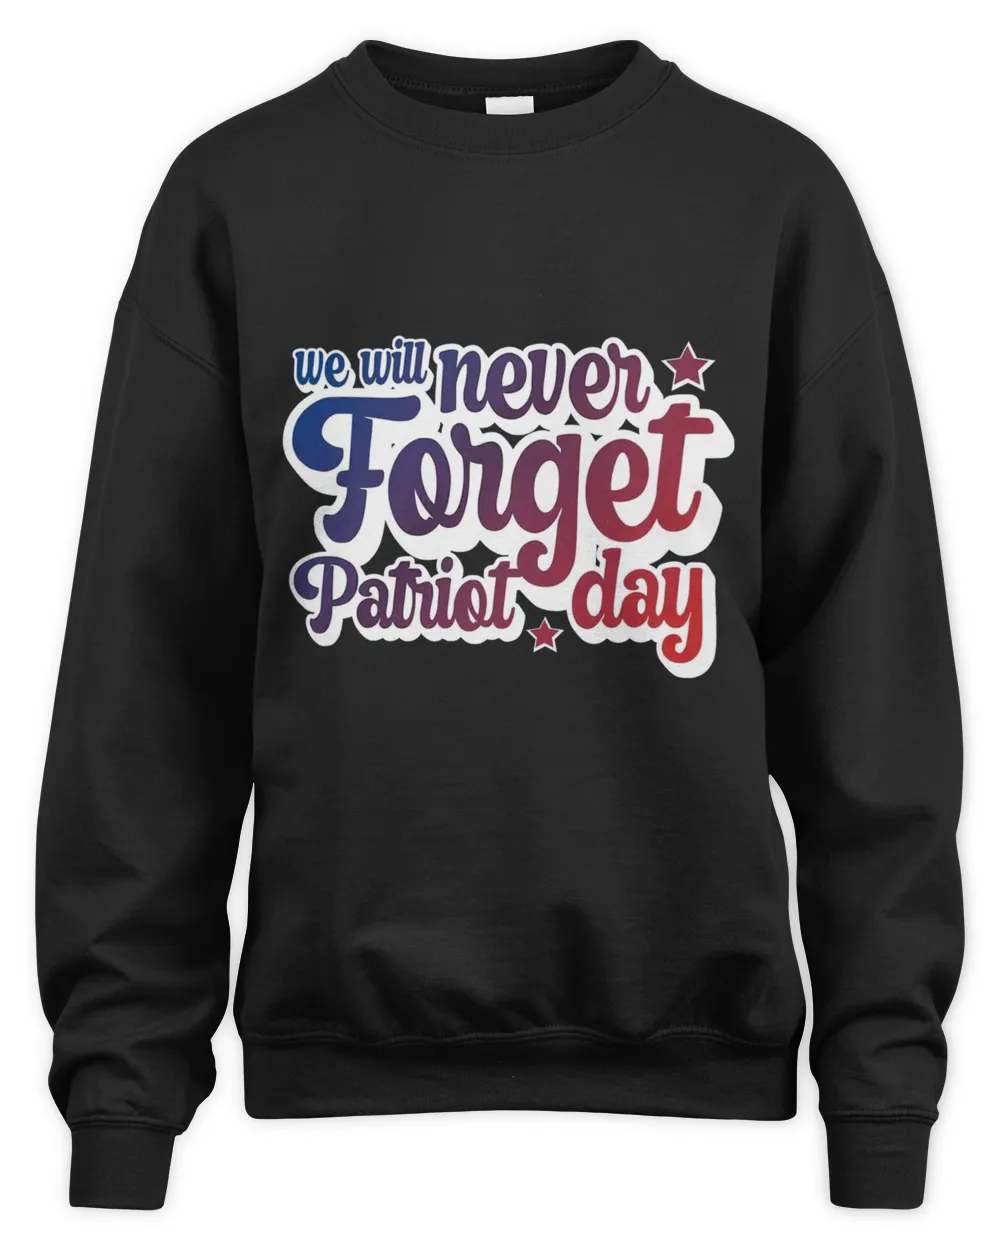 We Will Never Forget 9.11 Patriot Day Hoodie